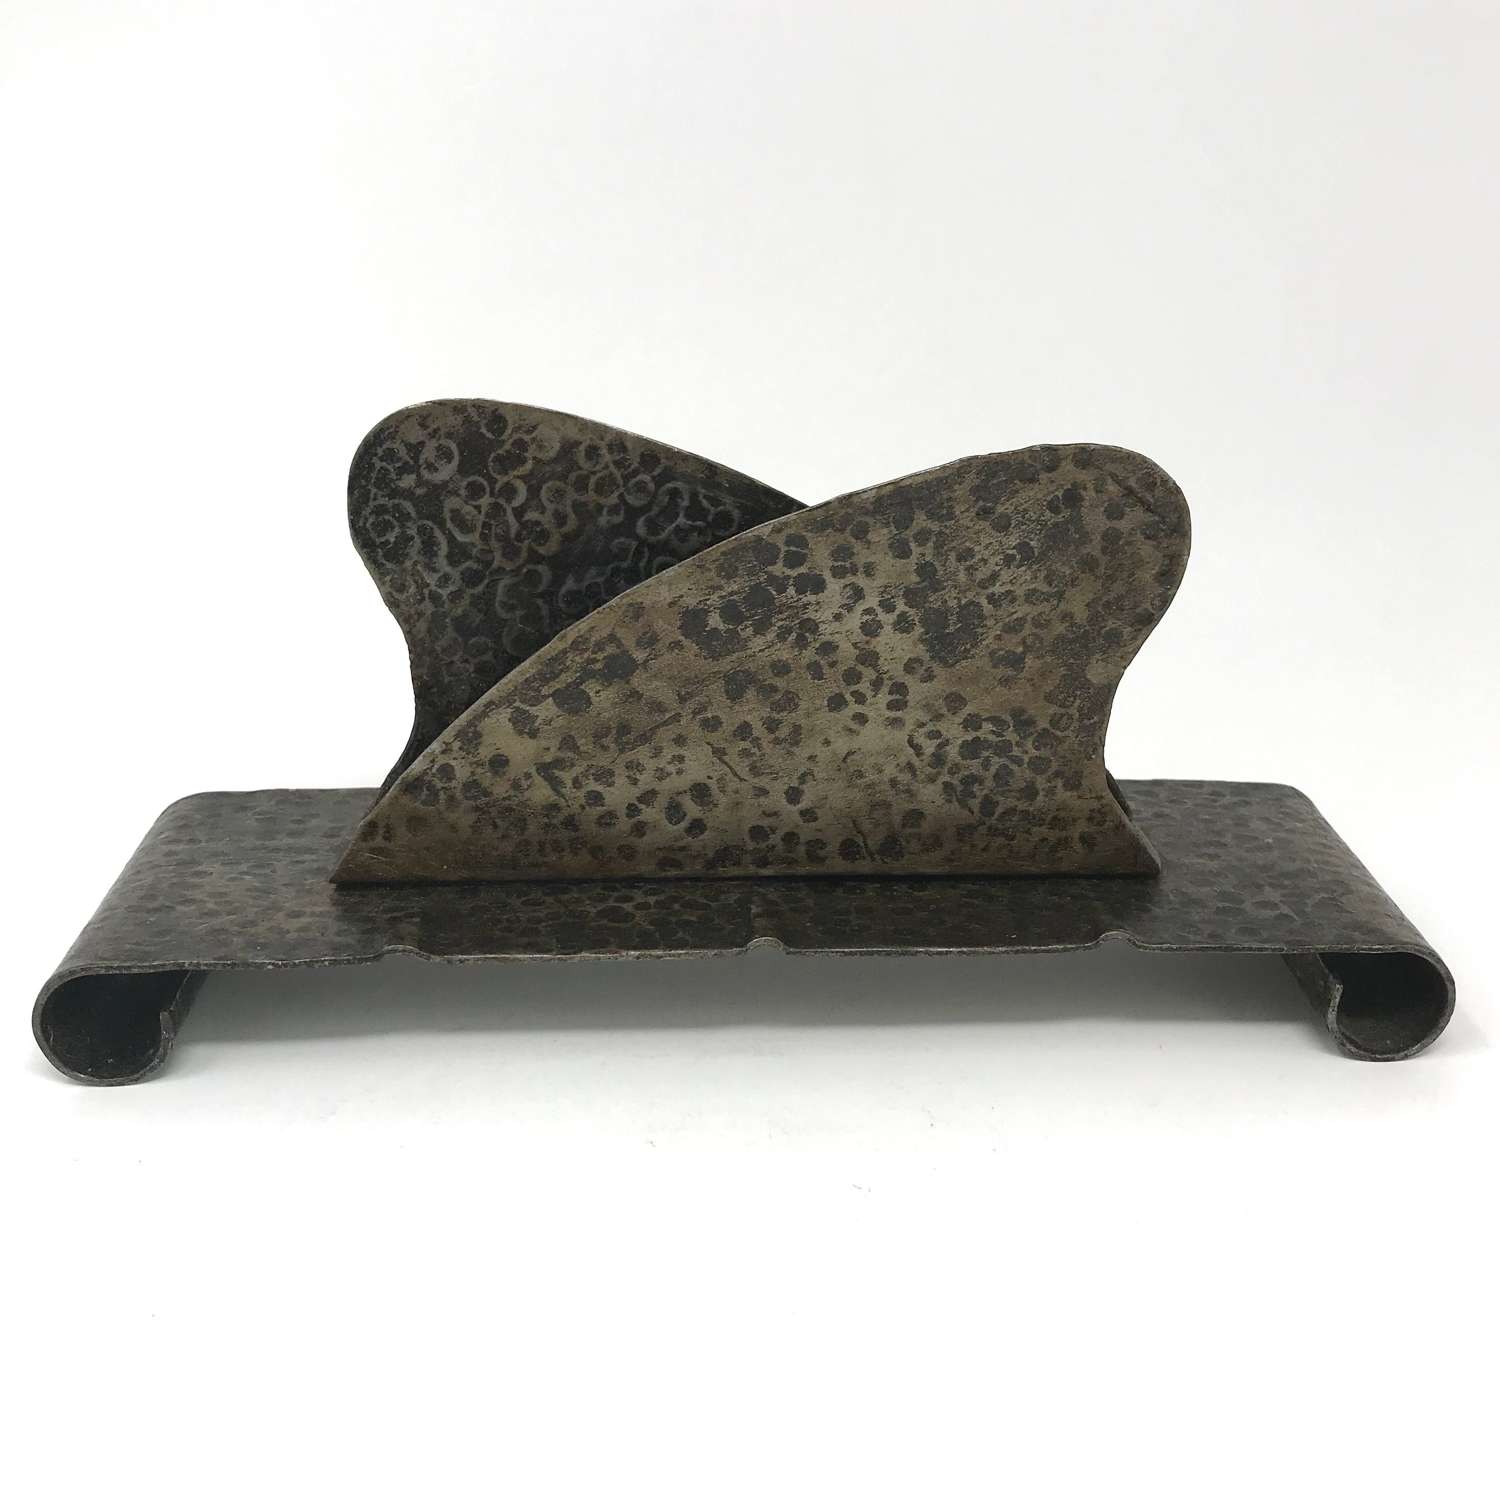 Amsterdam School Patinated Metal Letter Holder 1920s No. 3